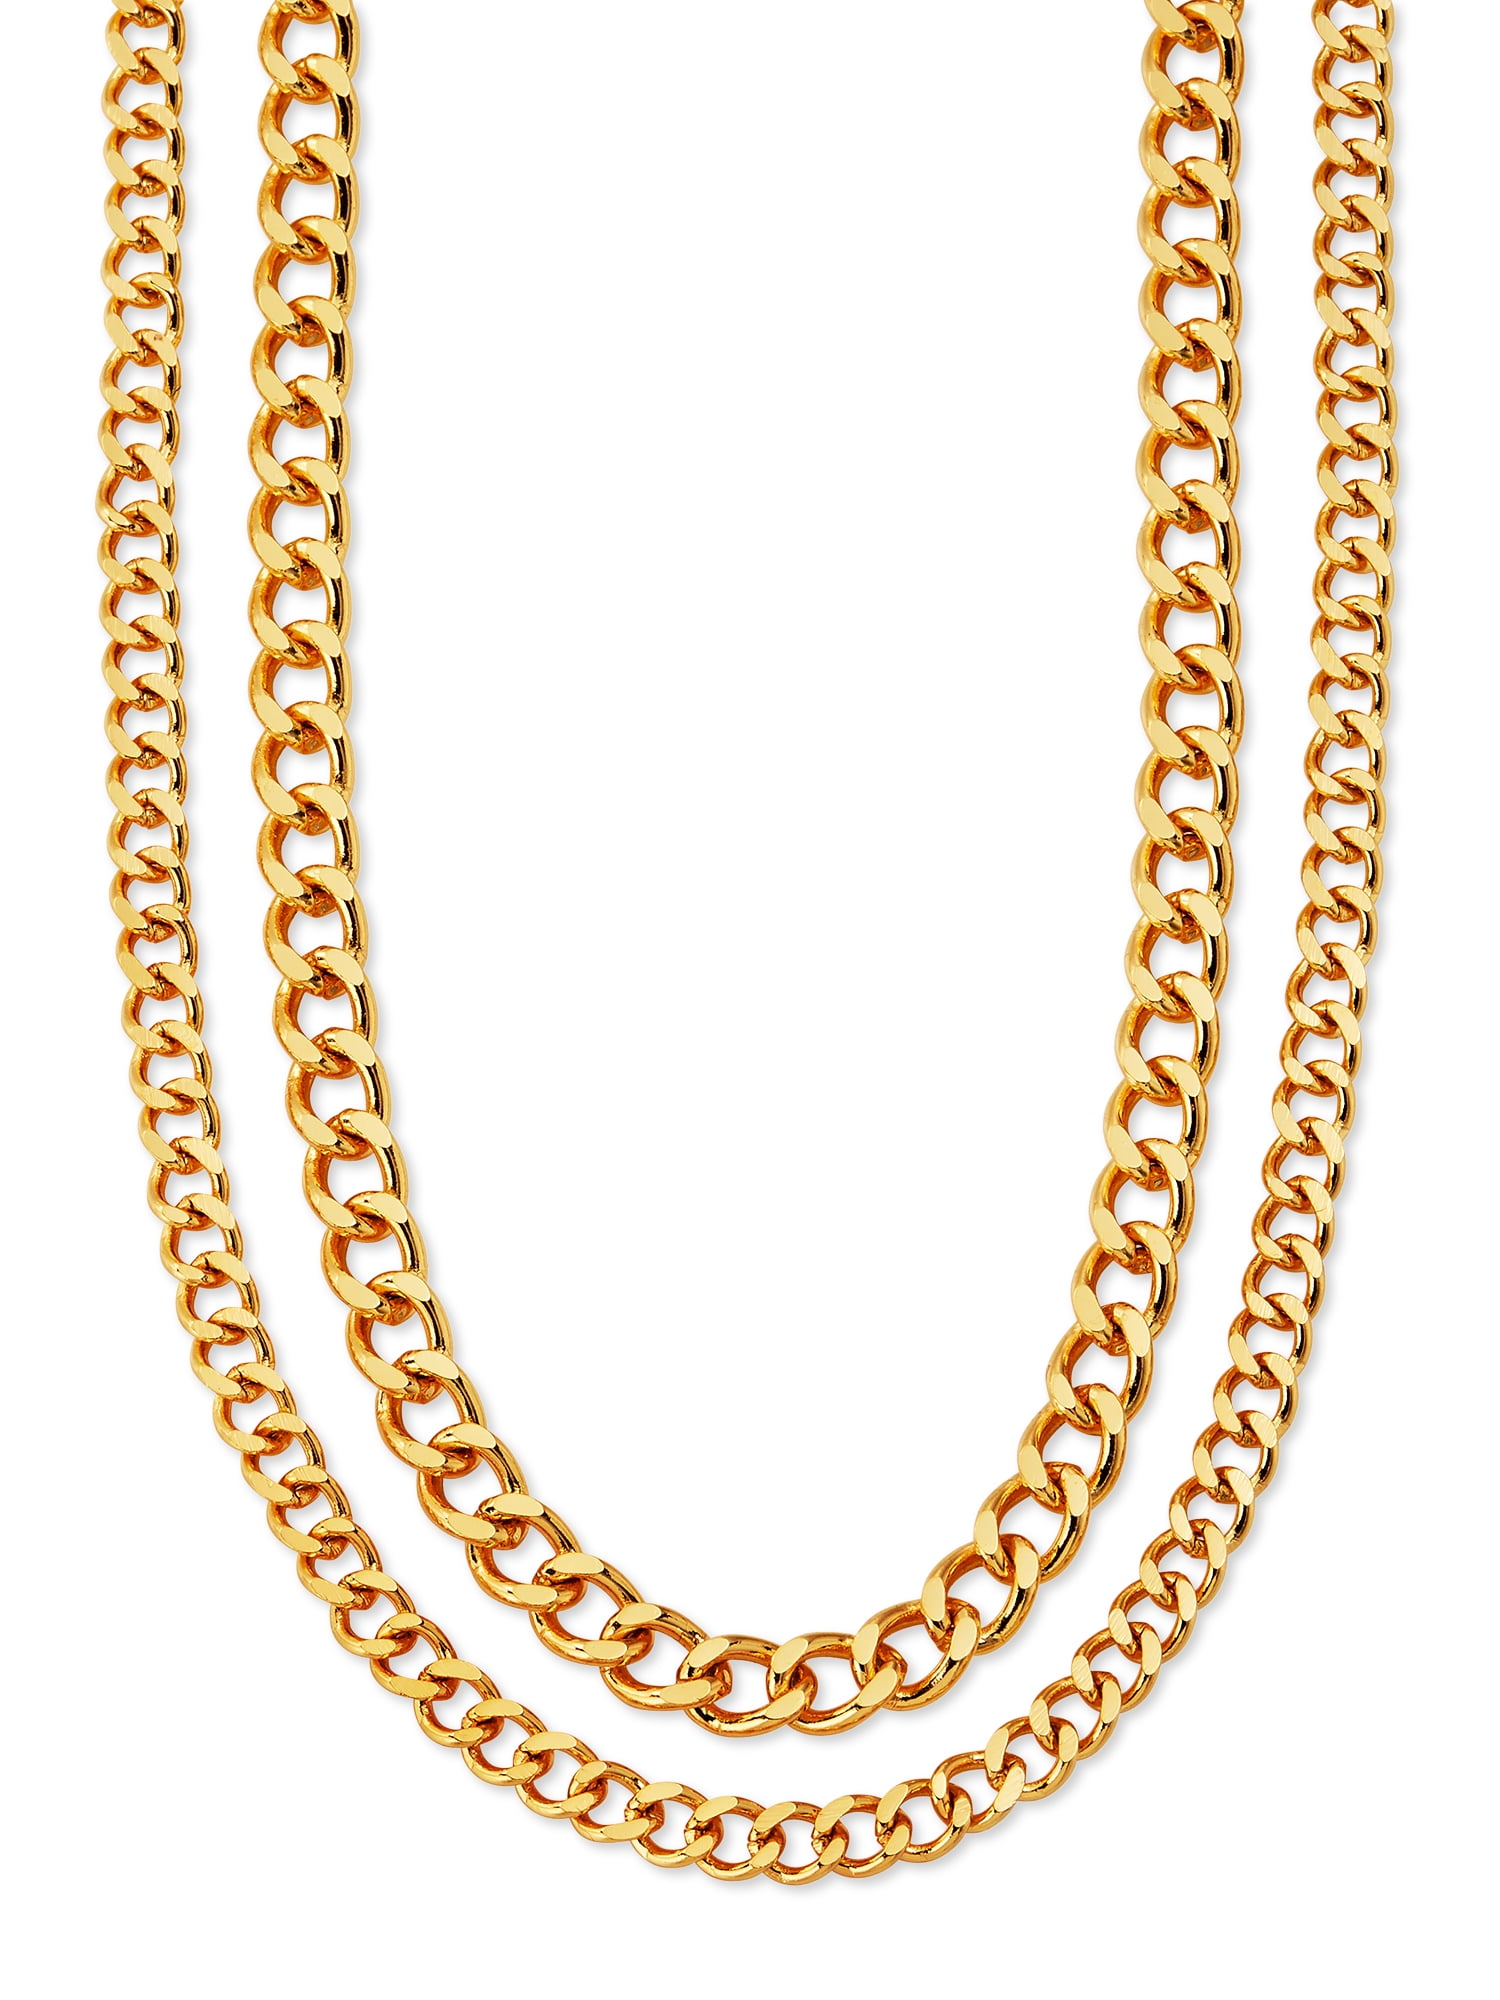 Scoop - Scoop Brass Yellow Gold-Plated Layered Curb Chain Necklace, 14. ...